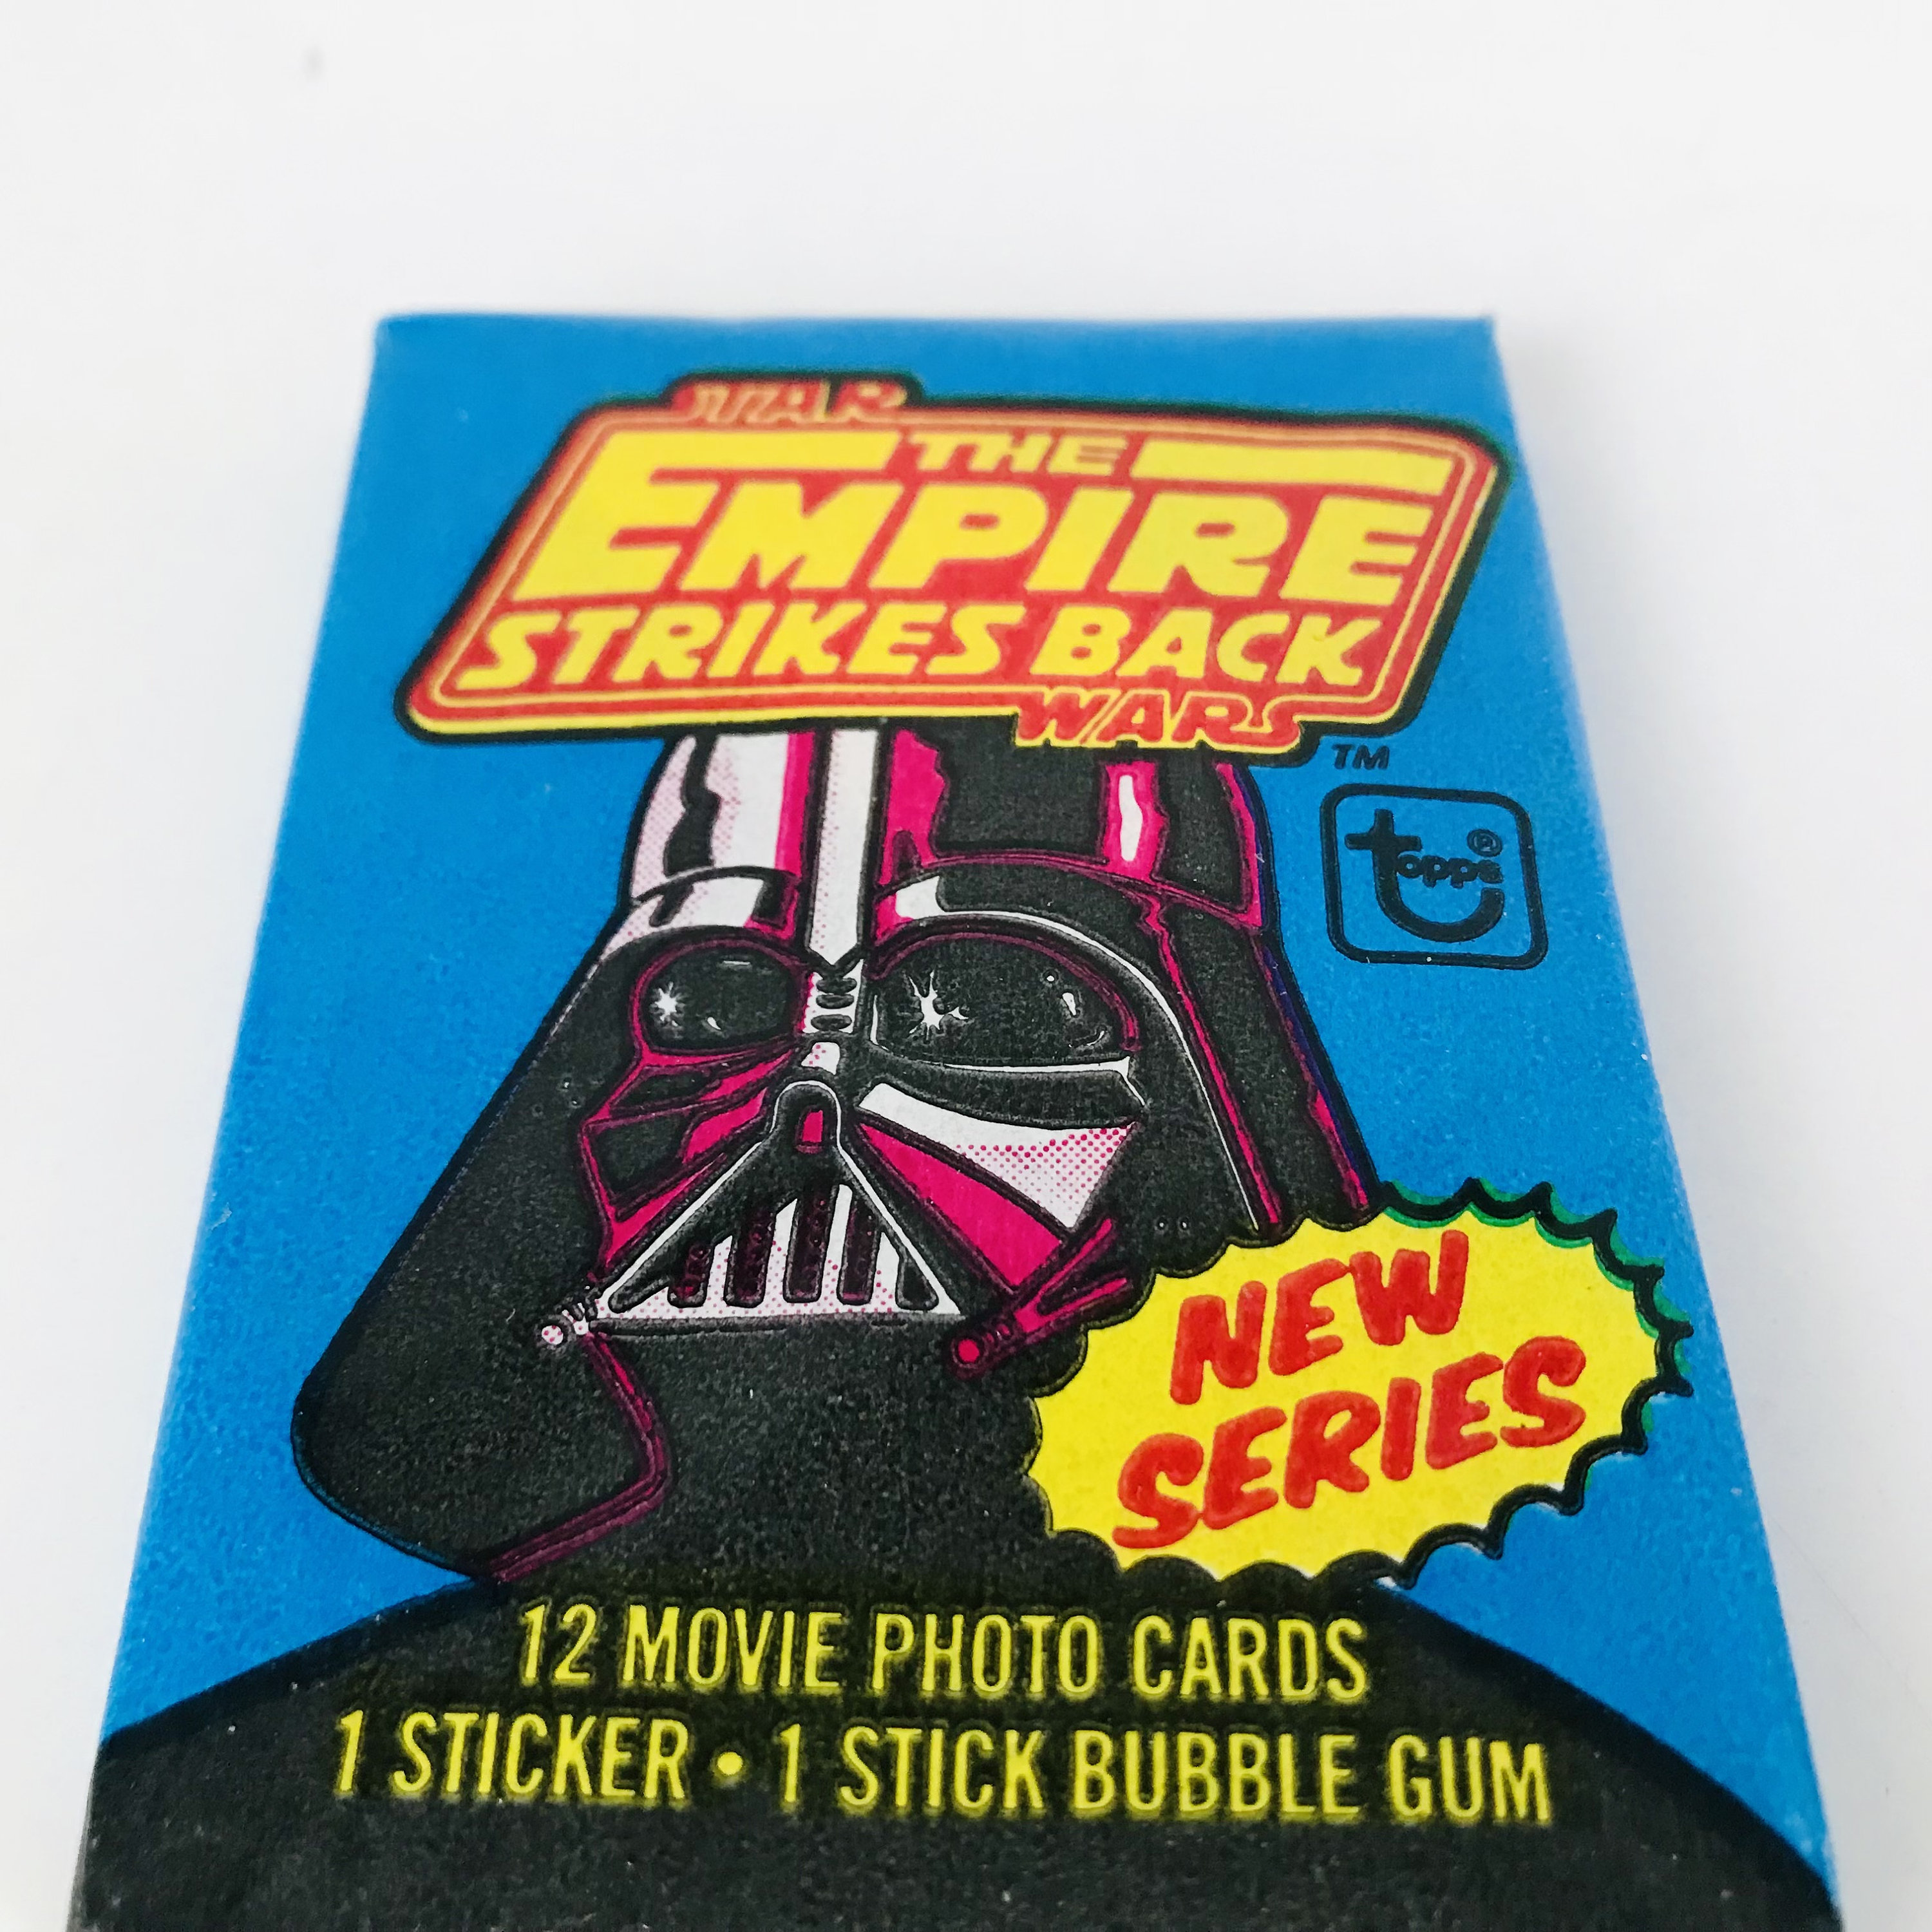 Unopened Wax Pack Vintage Nostalgia Darth Vader Sci Fi Nerd Gift Star Wars The Empire Strikes Back Trading Cards 1980 Topps Movie